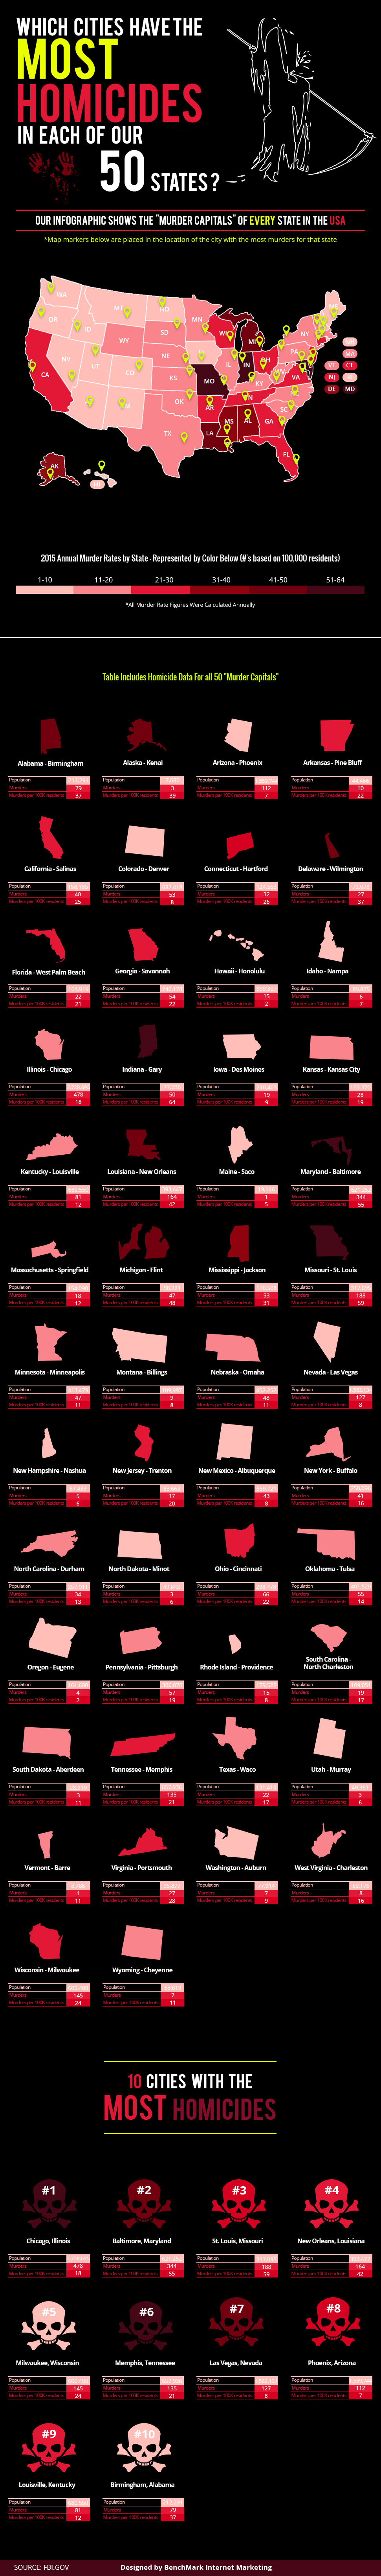 Most Homicides in Each or Our 50 States